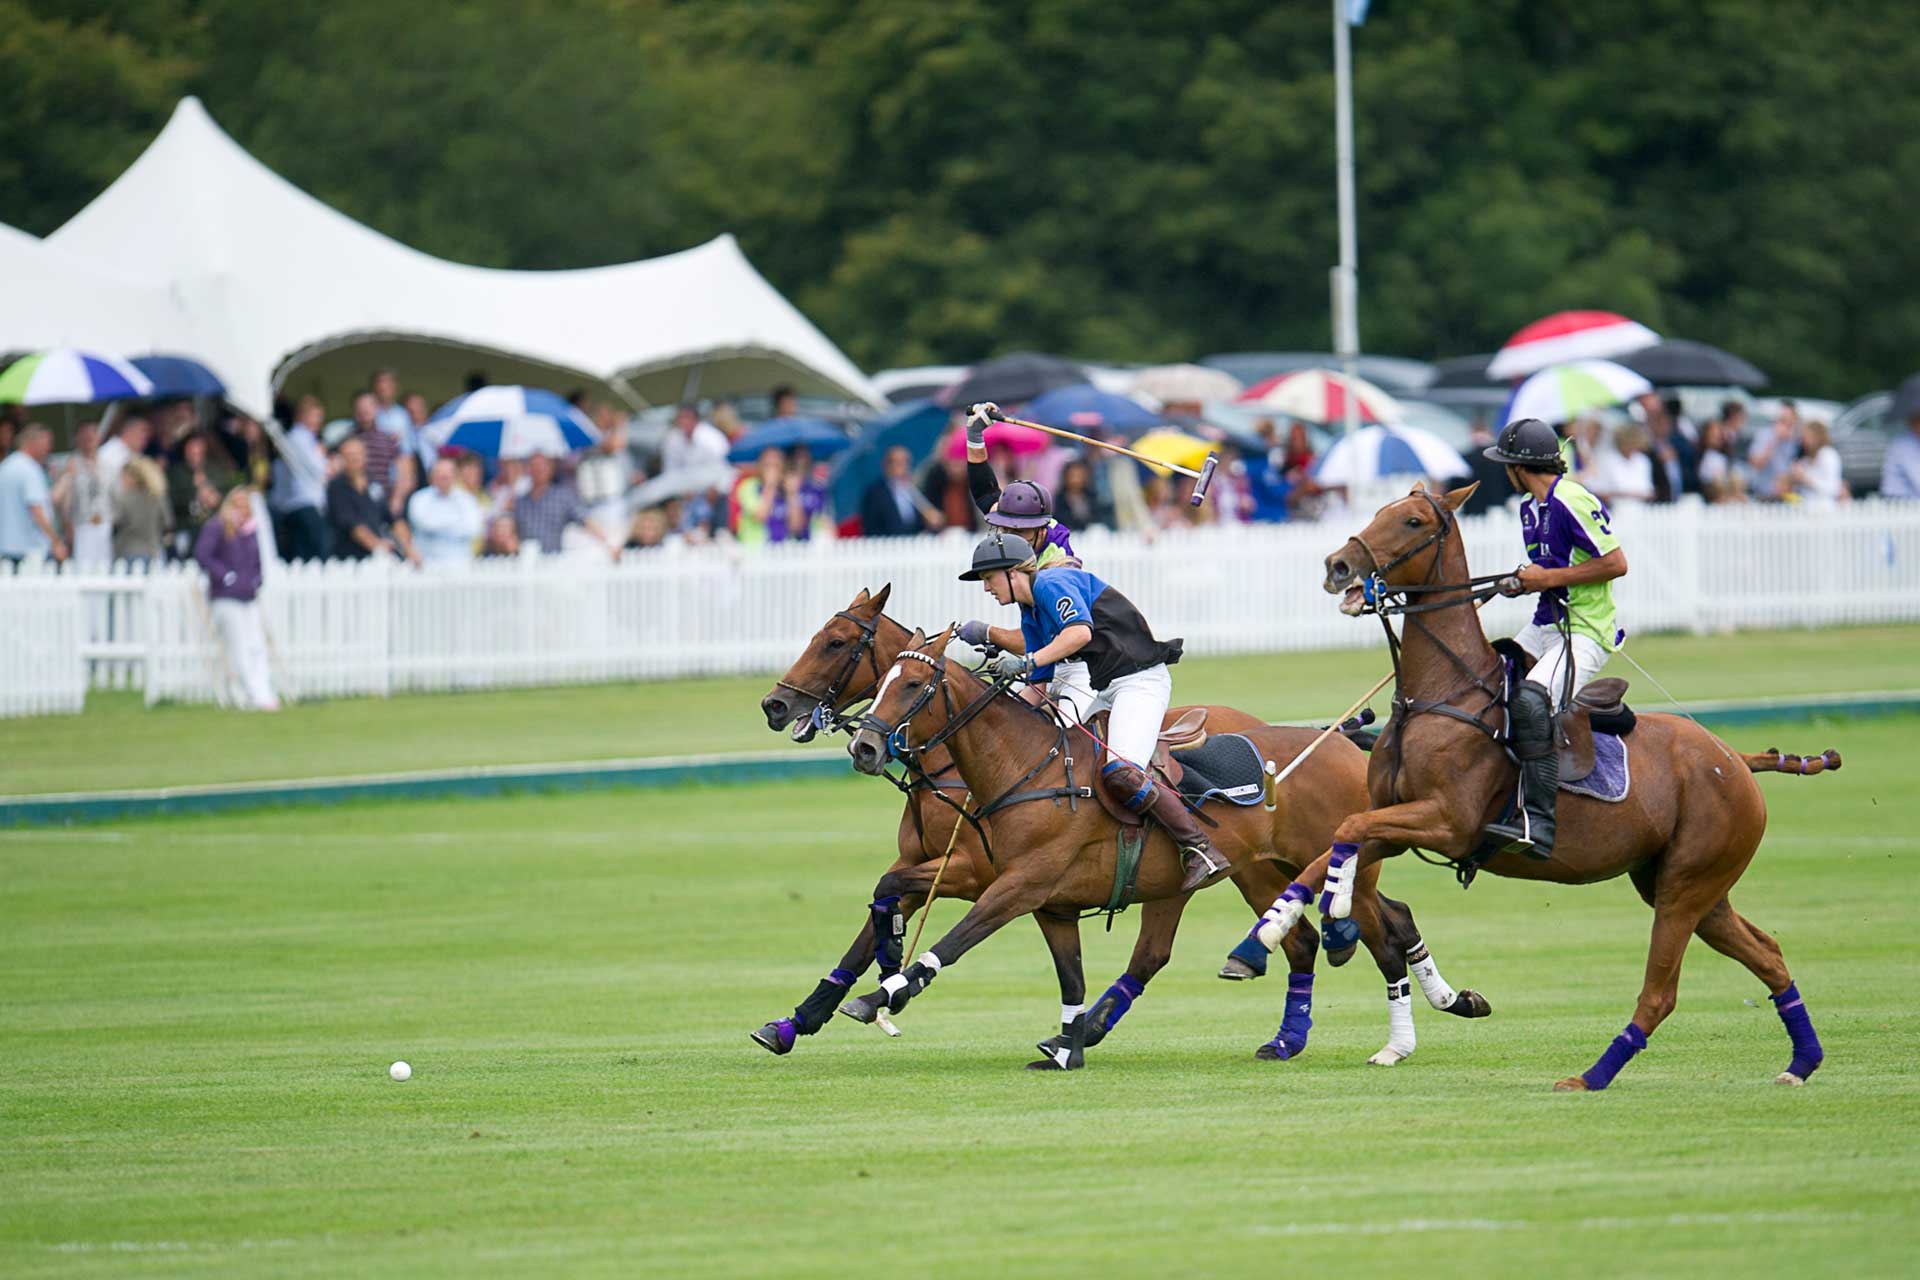 Polo as a corporate activity at Hurtwood Park